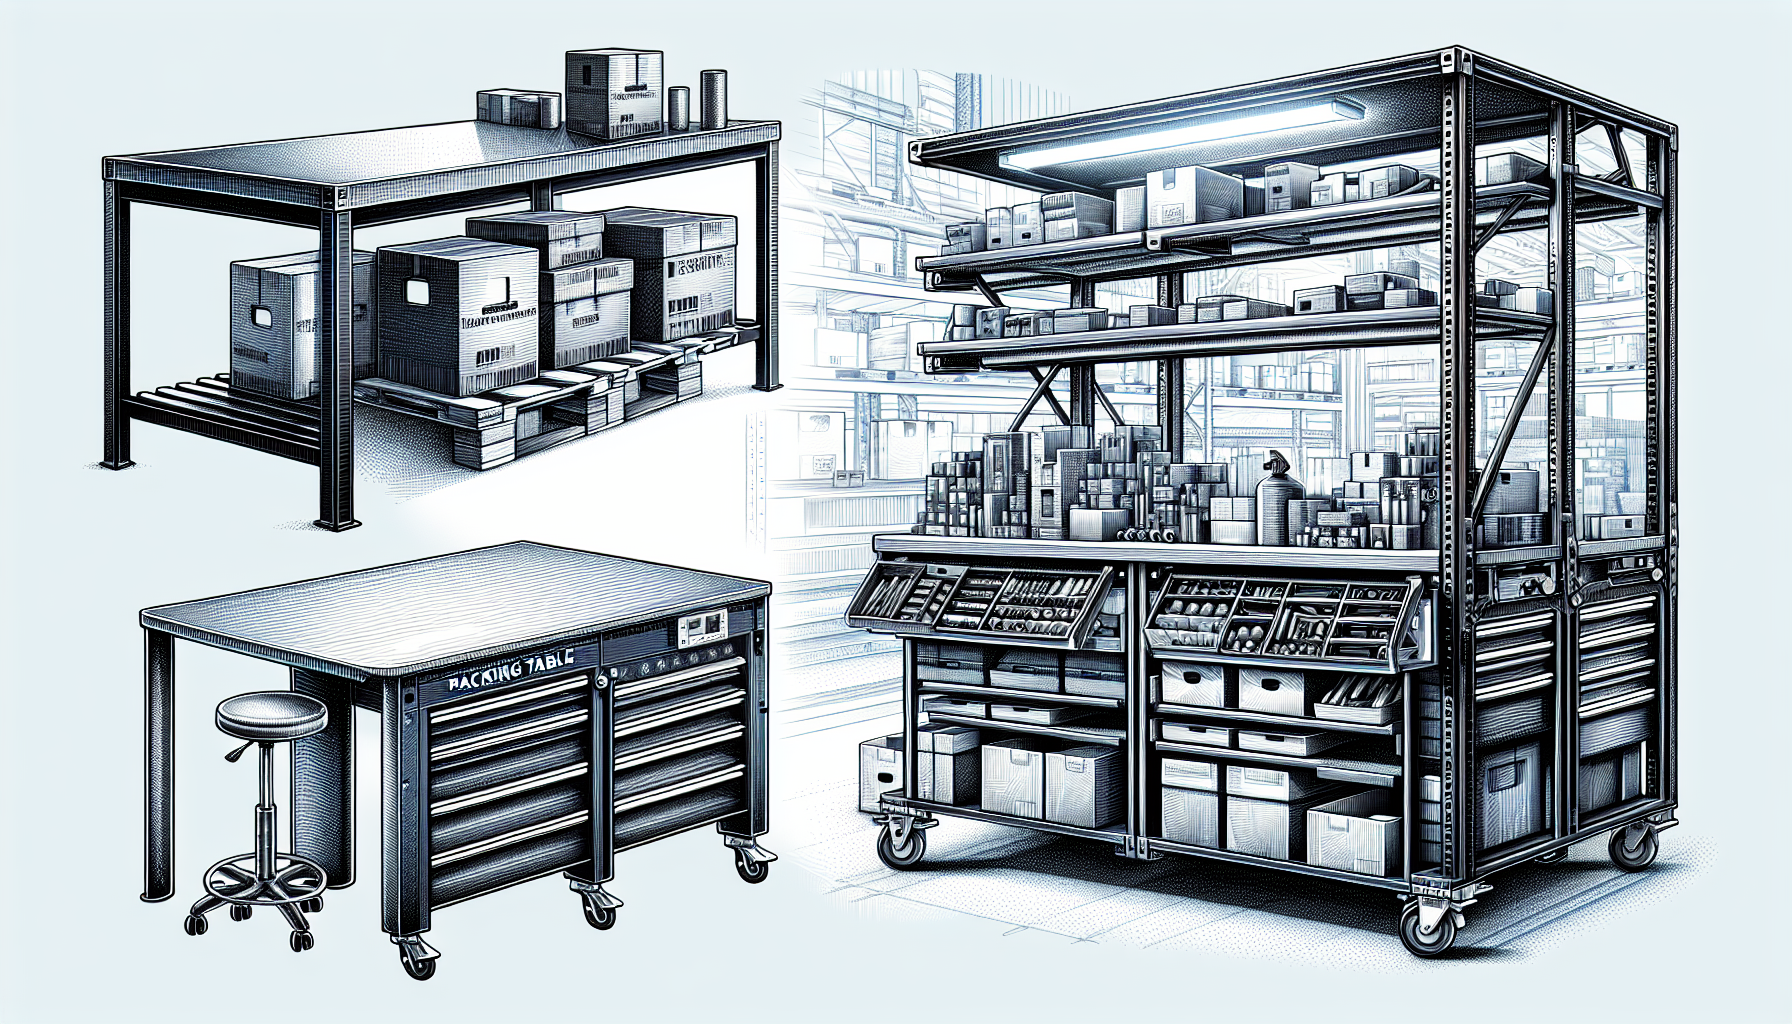 Different types of packing tables suitable for various industrial environments